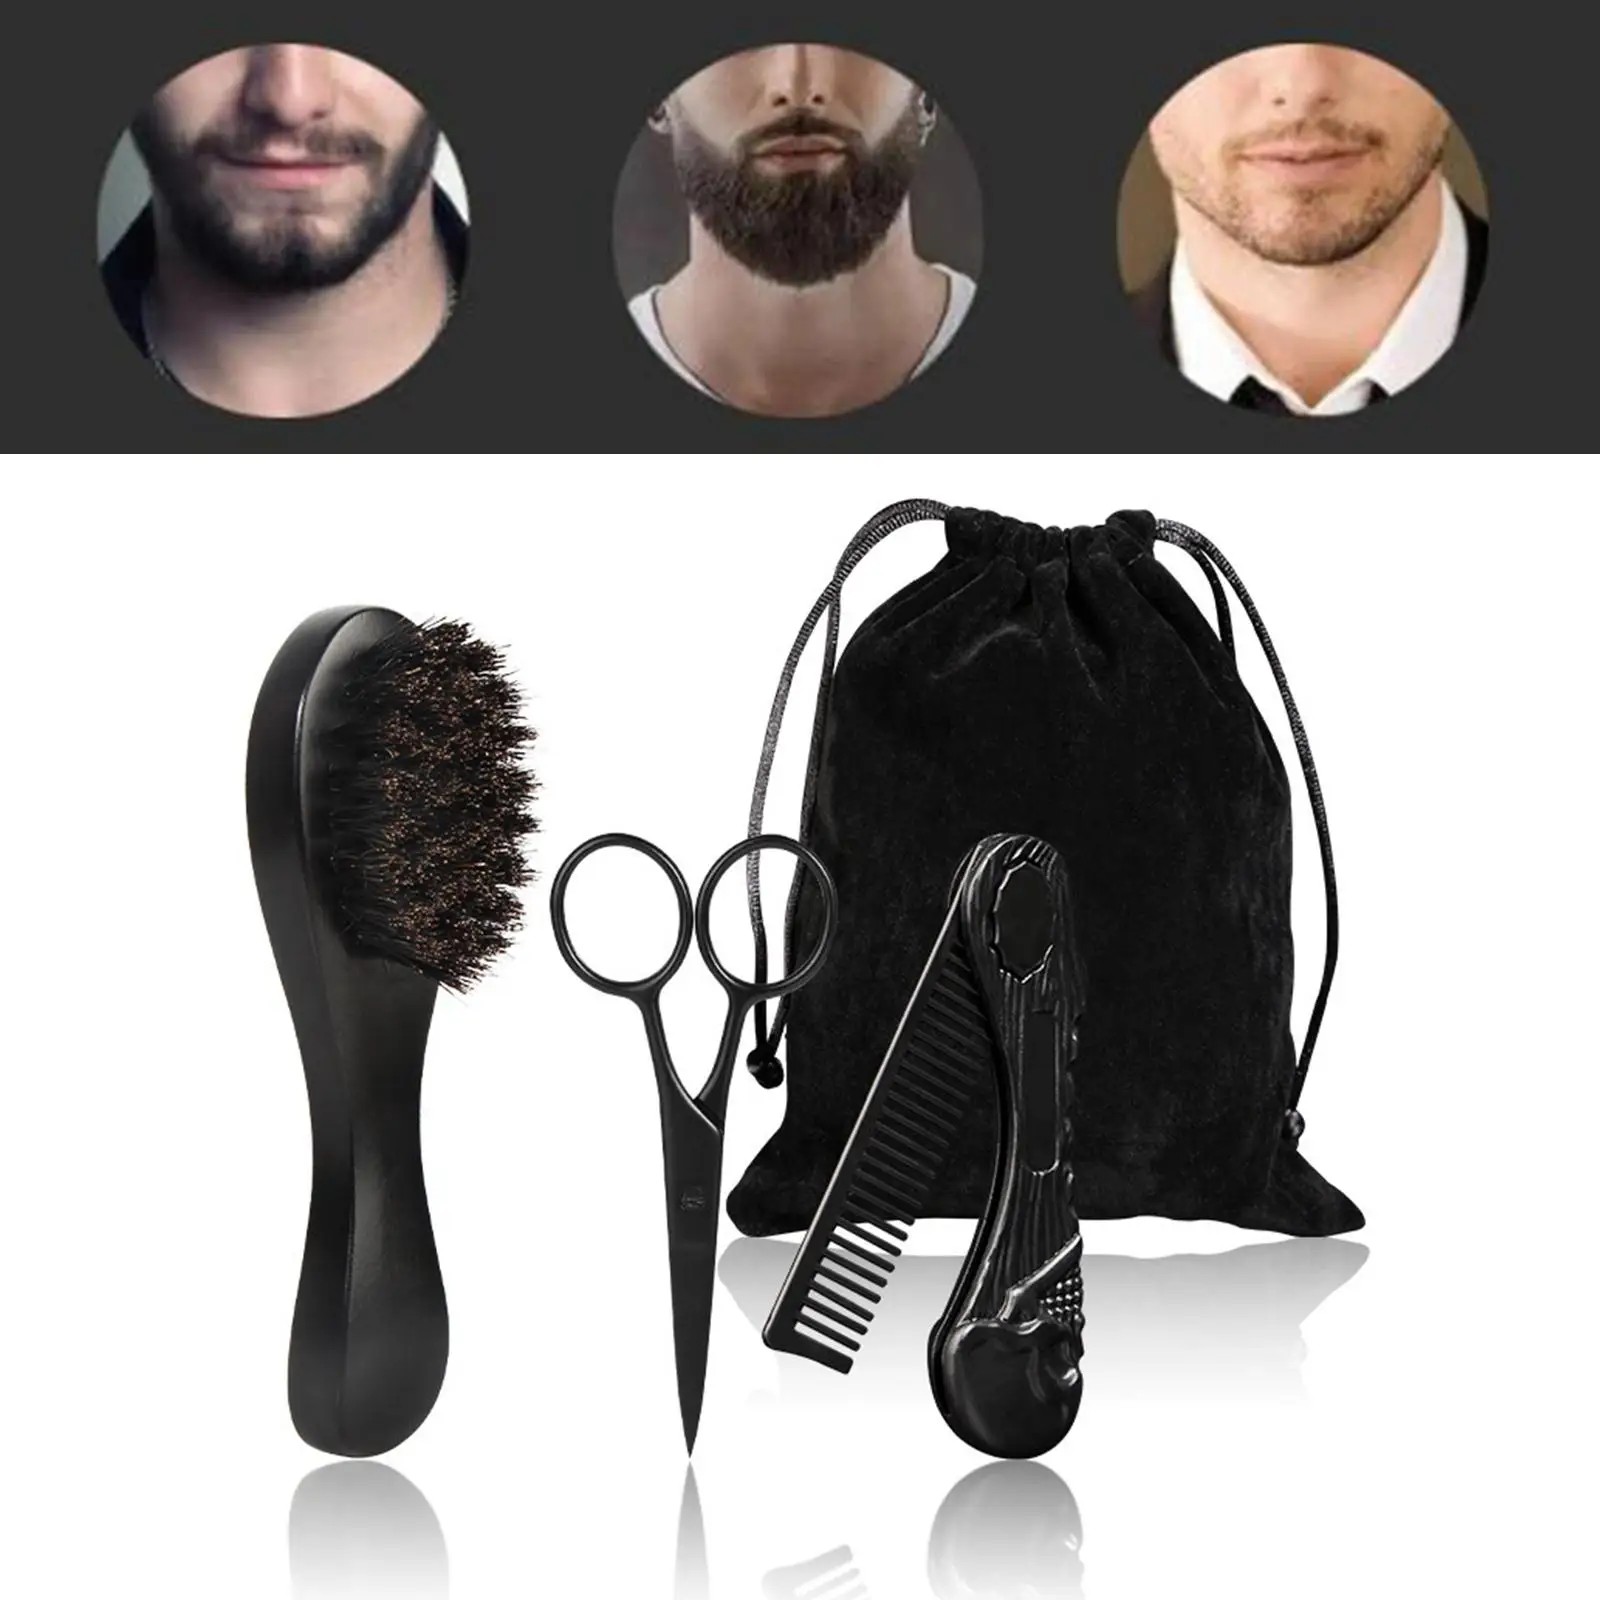 3 Pieces Professional Beard Care Kit Gift Folding Comb with Dustproof Bag for Men`s Cleaning Grooming Tool Beard Grooming Kit